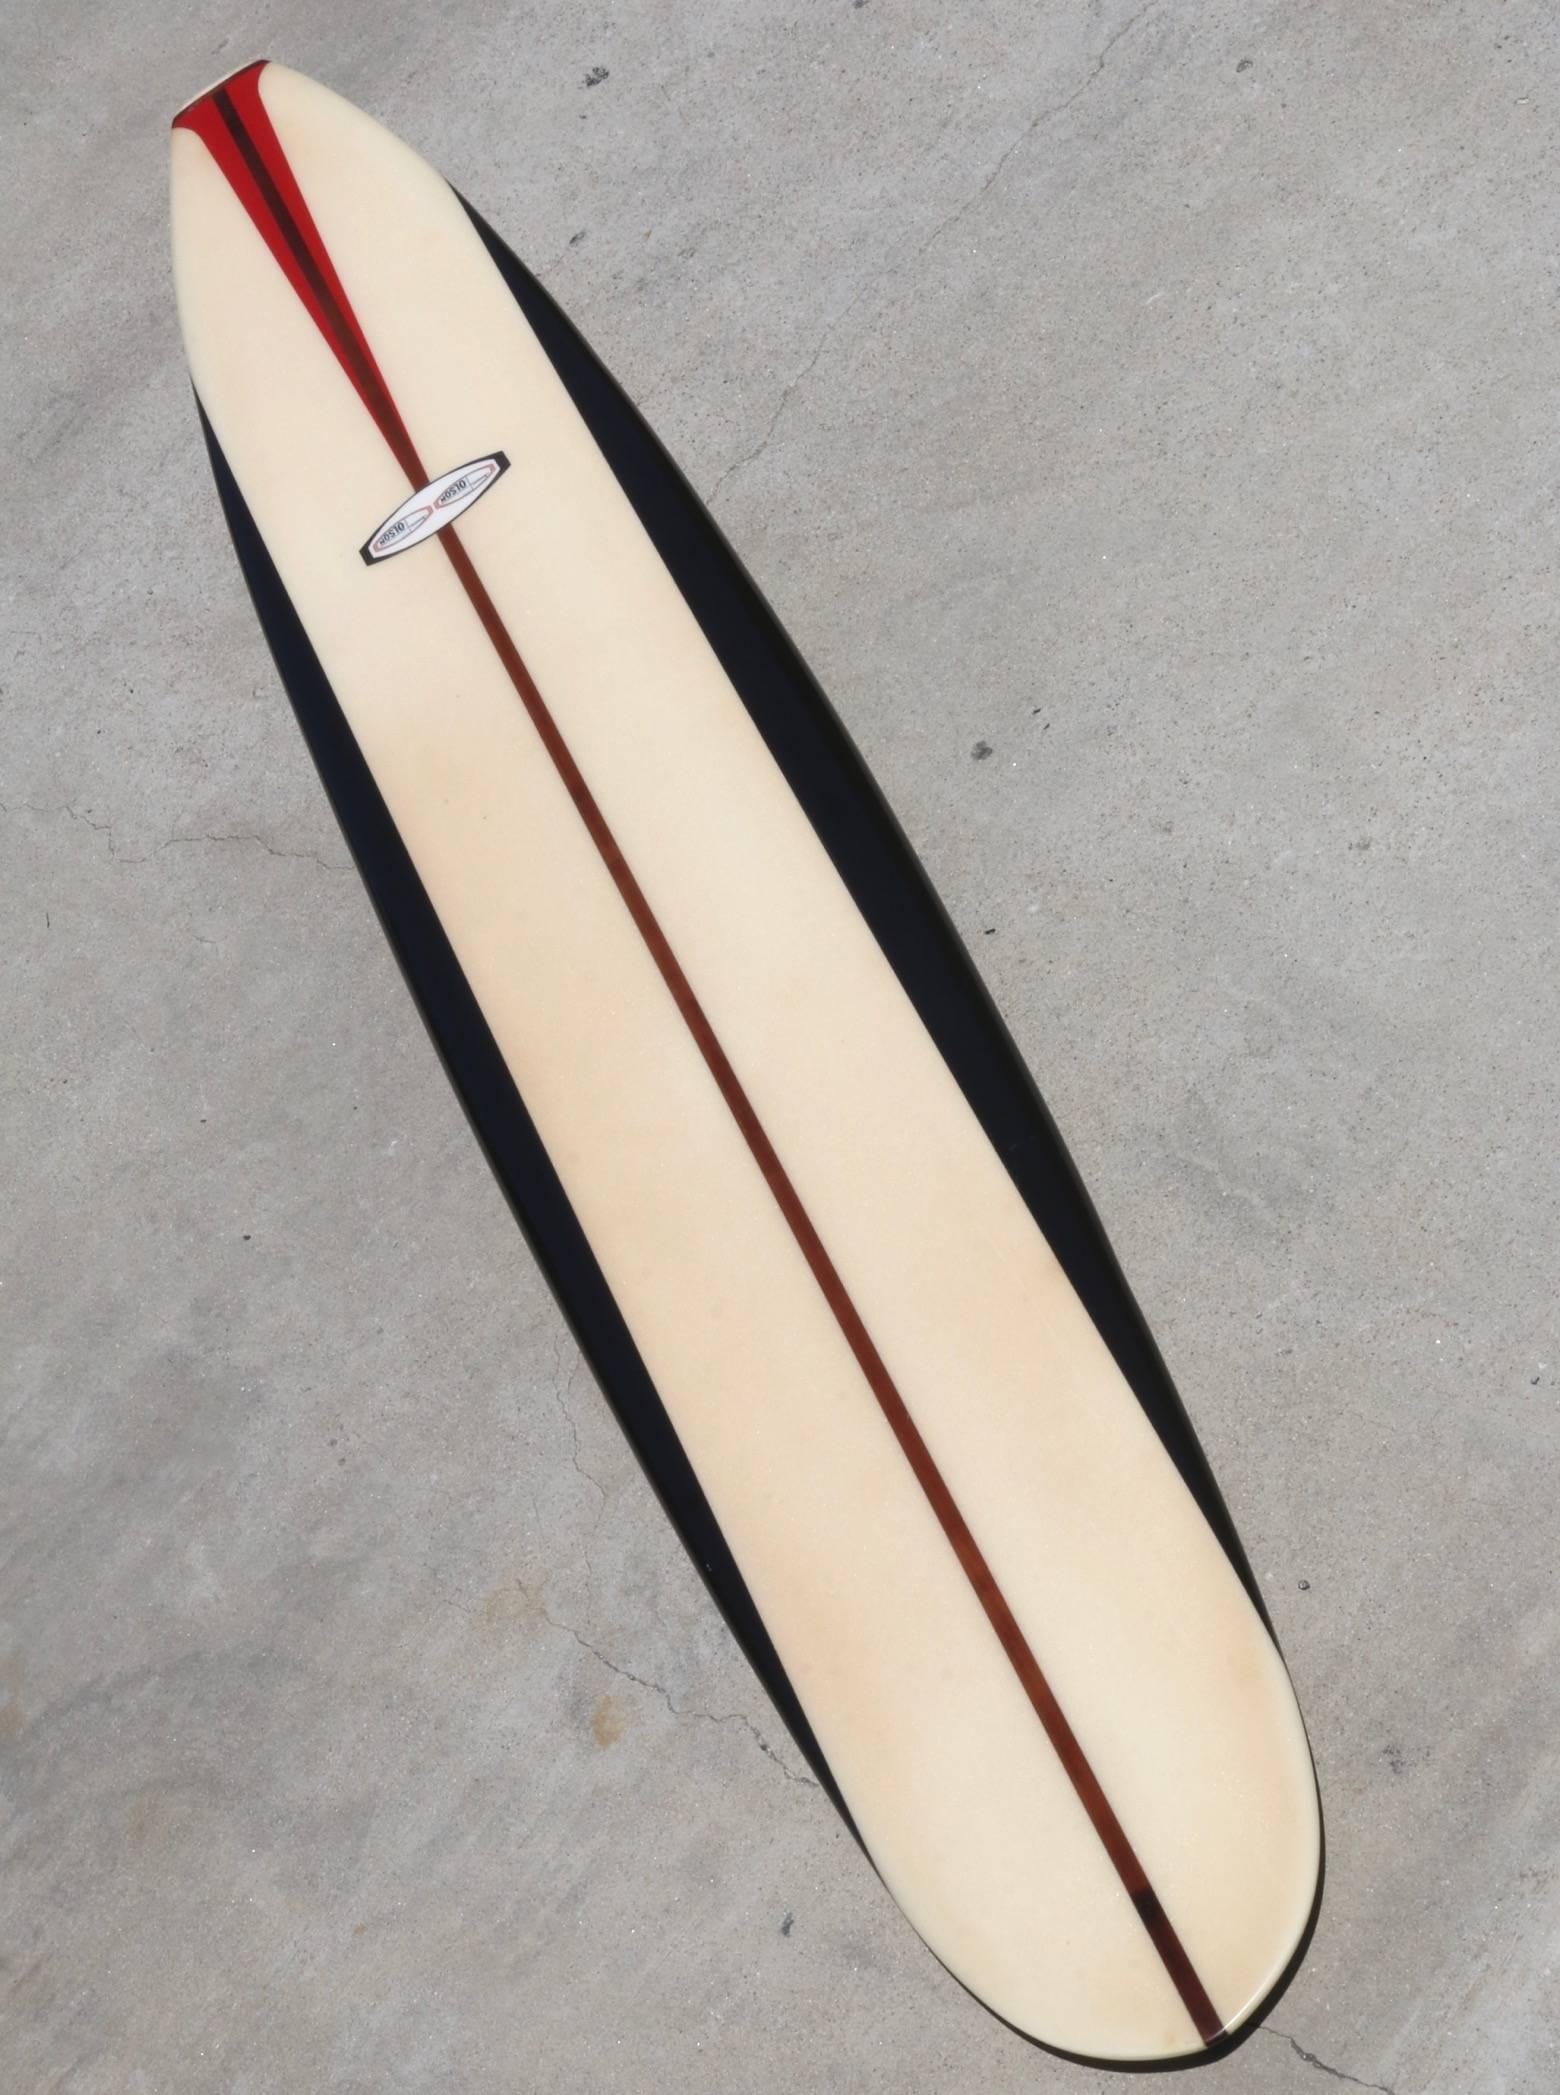 We see very few Olsen surfboards and we are happy this great example came to us. Classic and stylish this 1960s California vintage surfboard has been fully restored to a shining beauty without loosing its authentic essence. The condition, color and